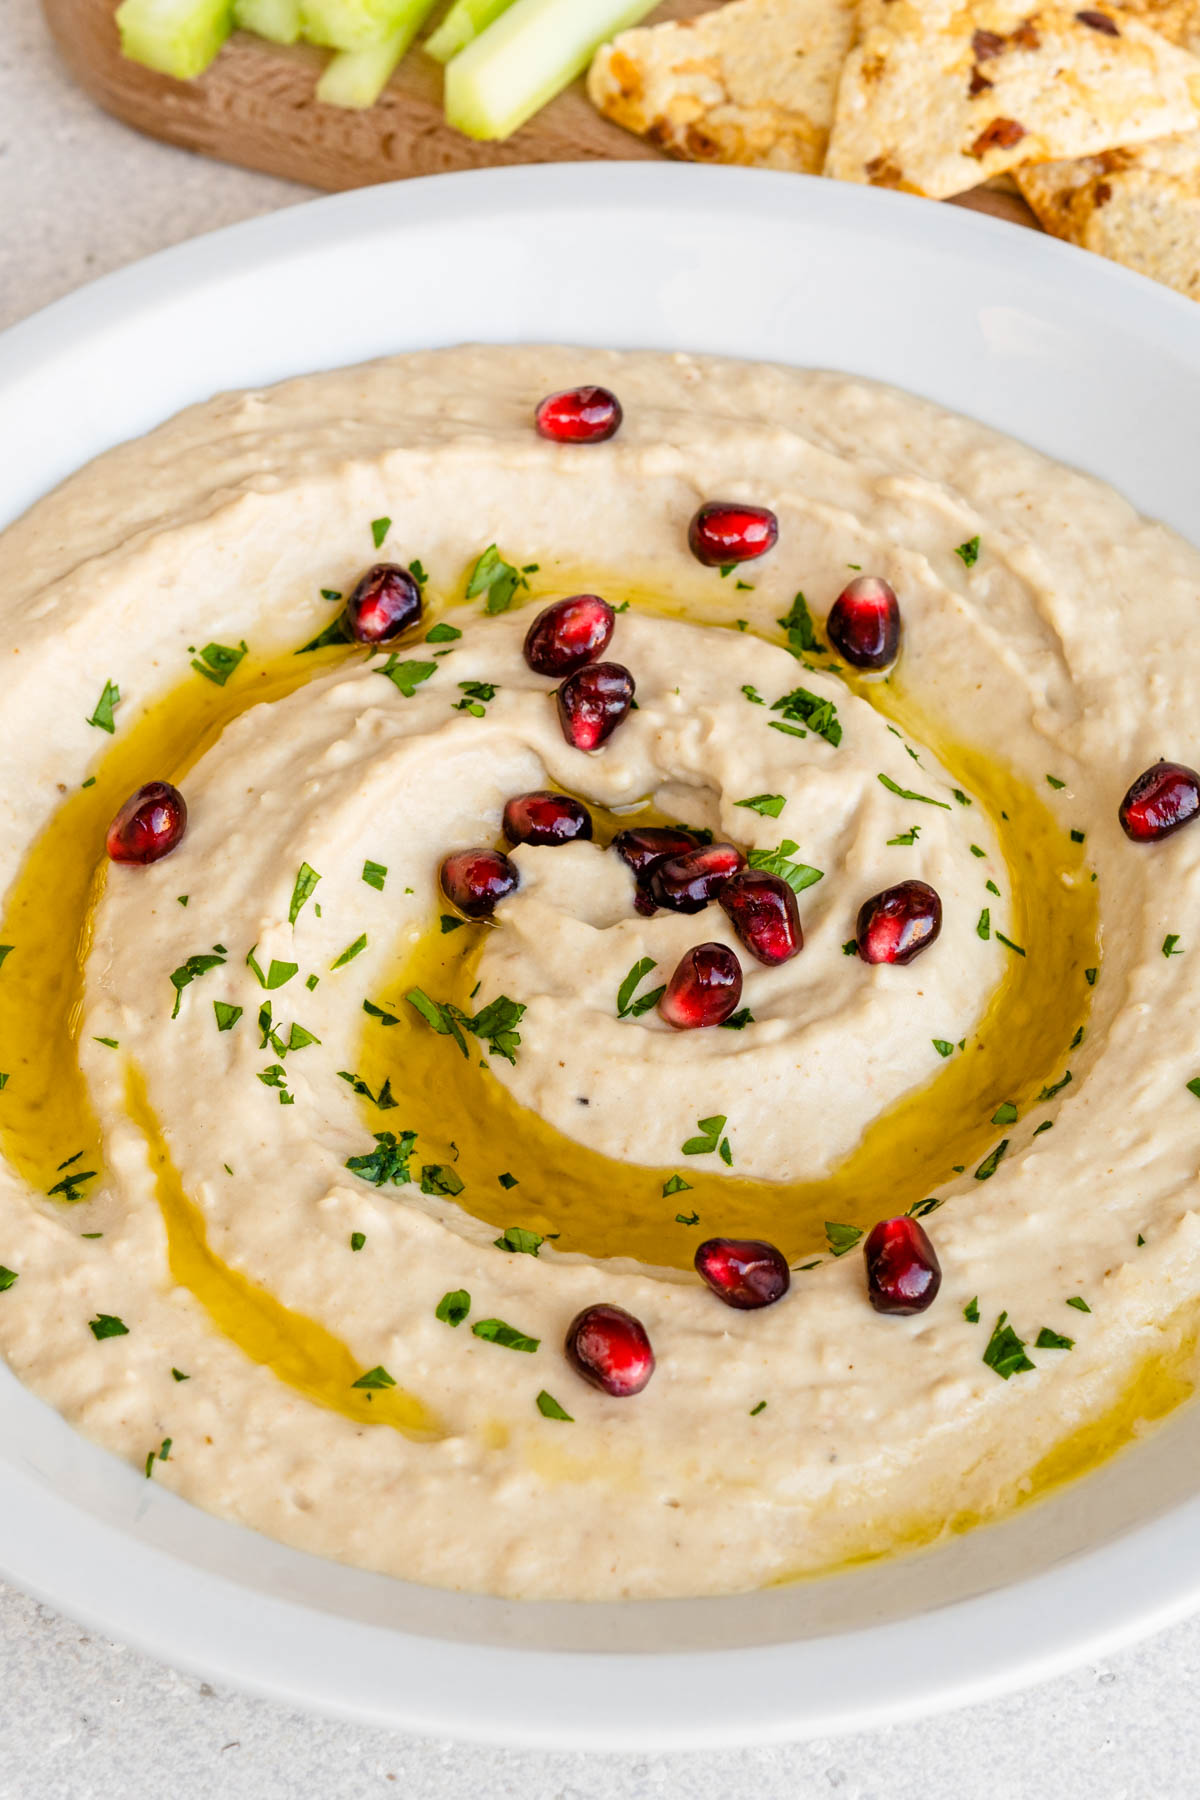 Bowl of white bean dip hummus garnished with pomegranate and parsley